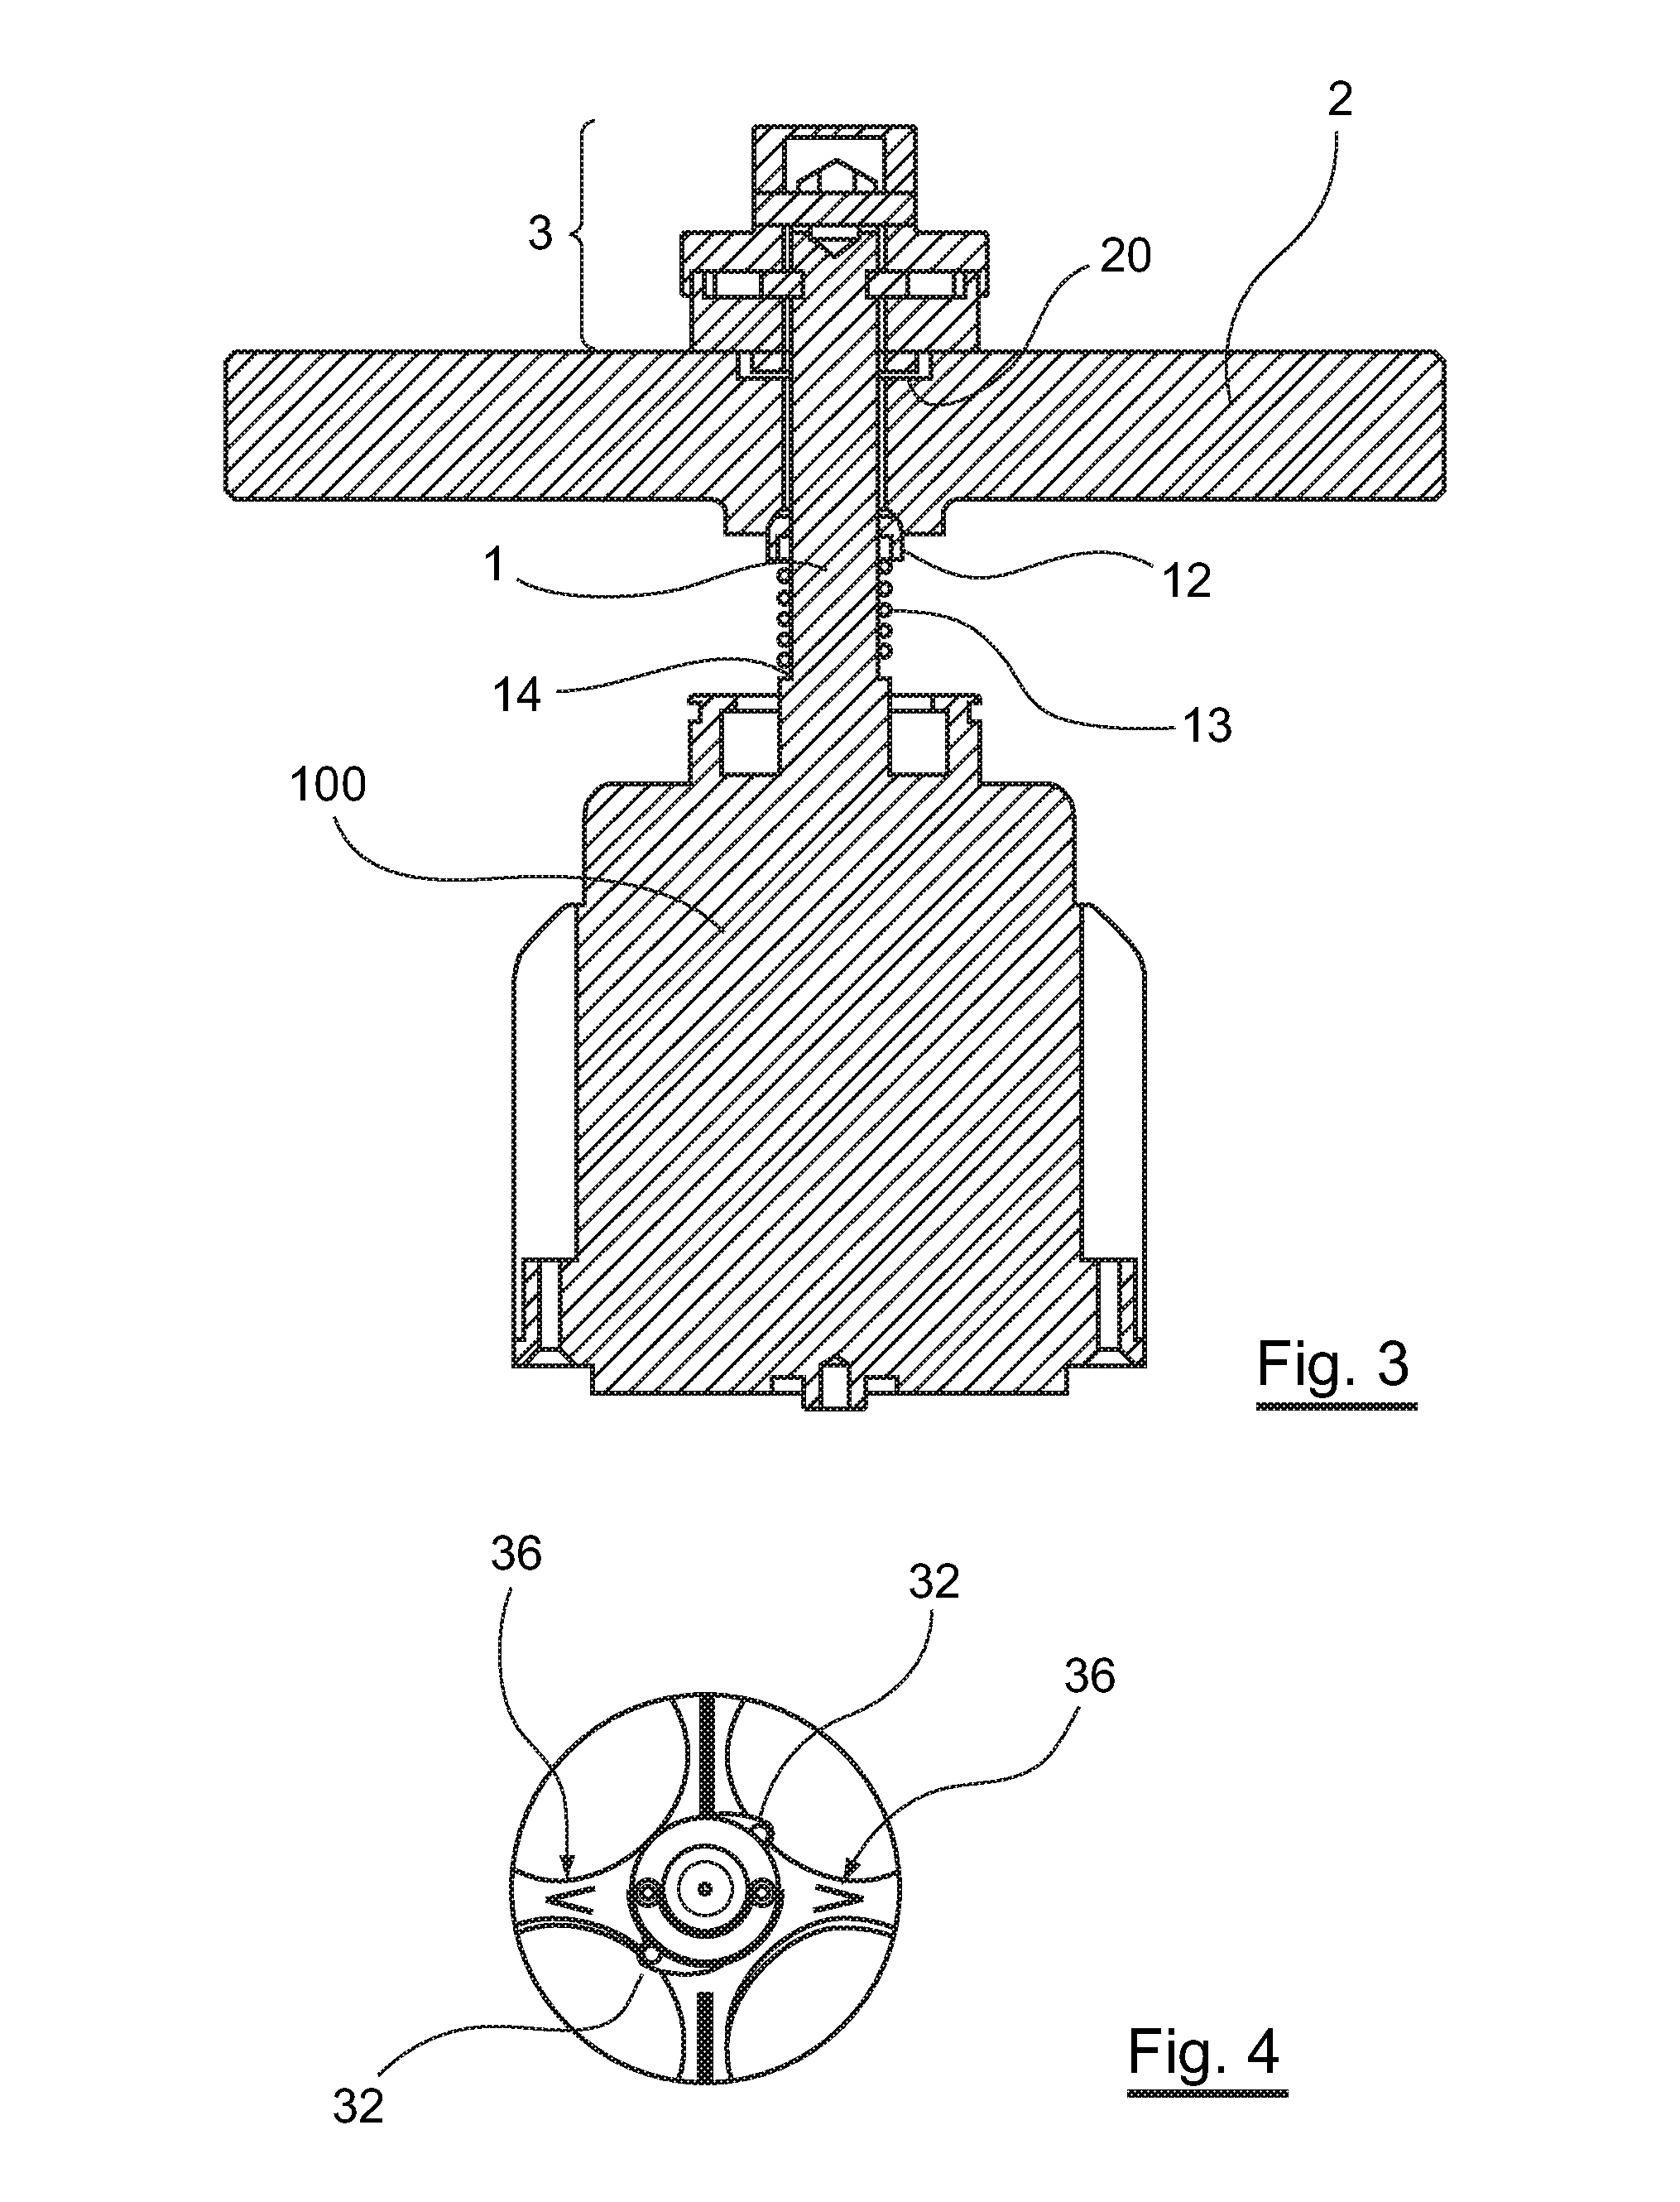 Centrifuge comprising visual and/or tactile indicator for indicating the accurate mounting of the rotor on the drive shaft, and corresponding rotor